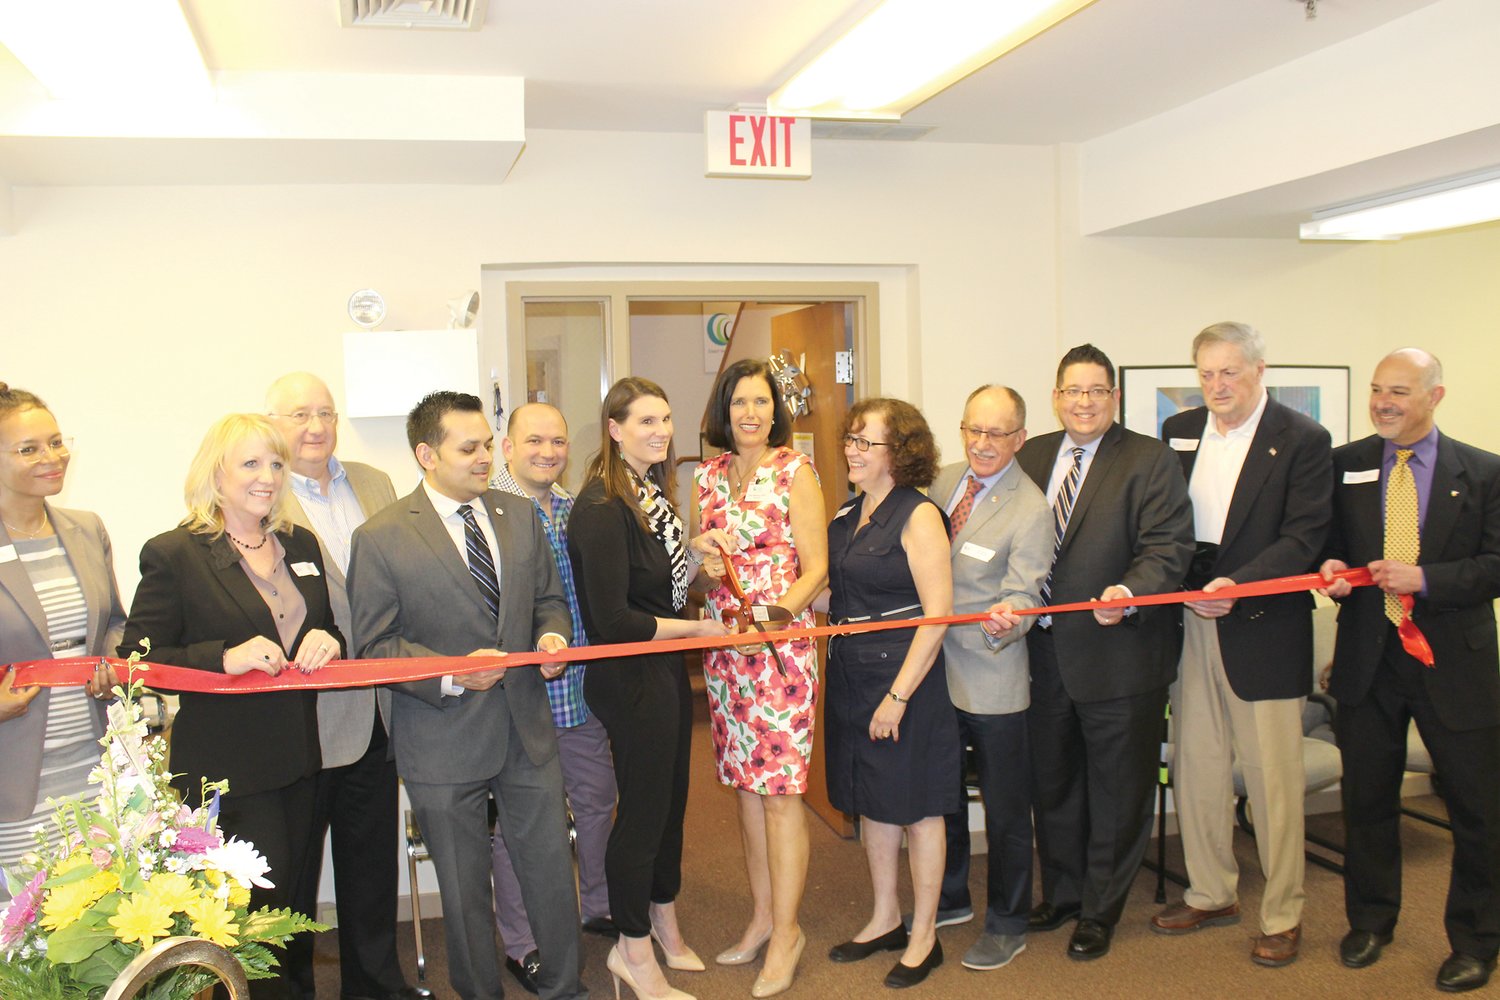 The Credit Counseling Center celebrates its 25th year at the expansion of its office in Richboro, with a ribbon cutting and reception hosted by Joan Reading, executive director, and its Board of Directors.